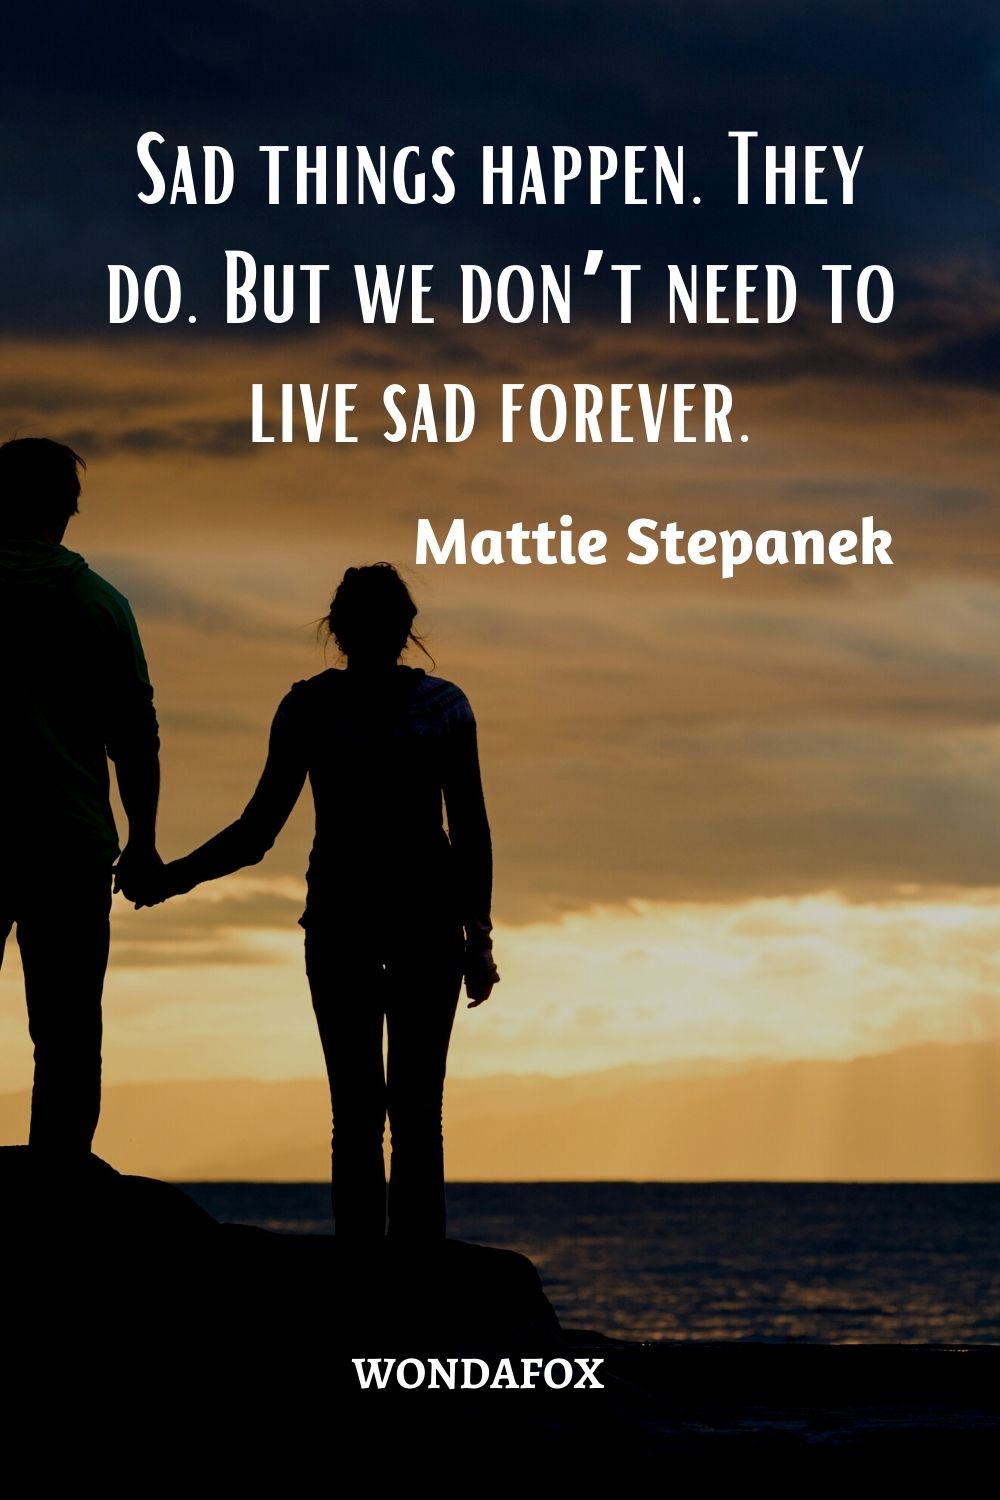 Sad things happen. They do. But we don’t need to live sad forever.
Mattie Stepanek